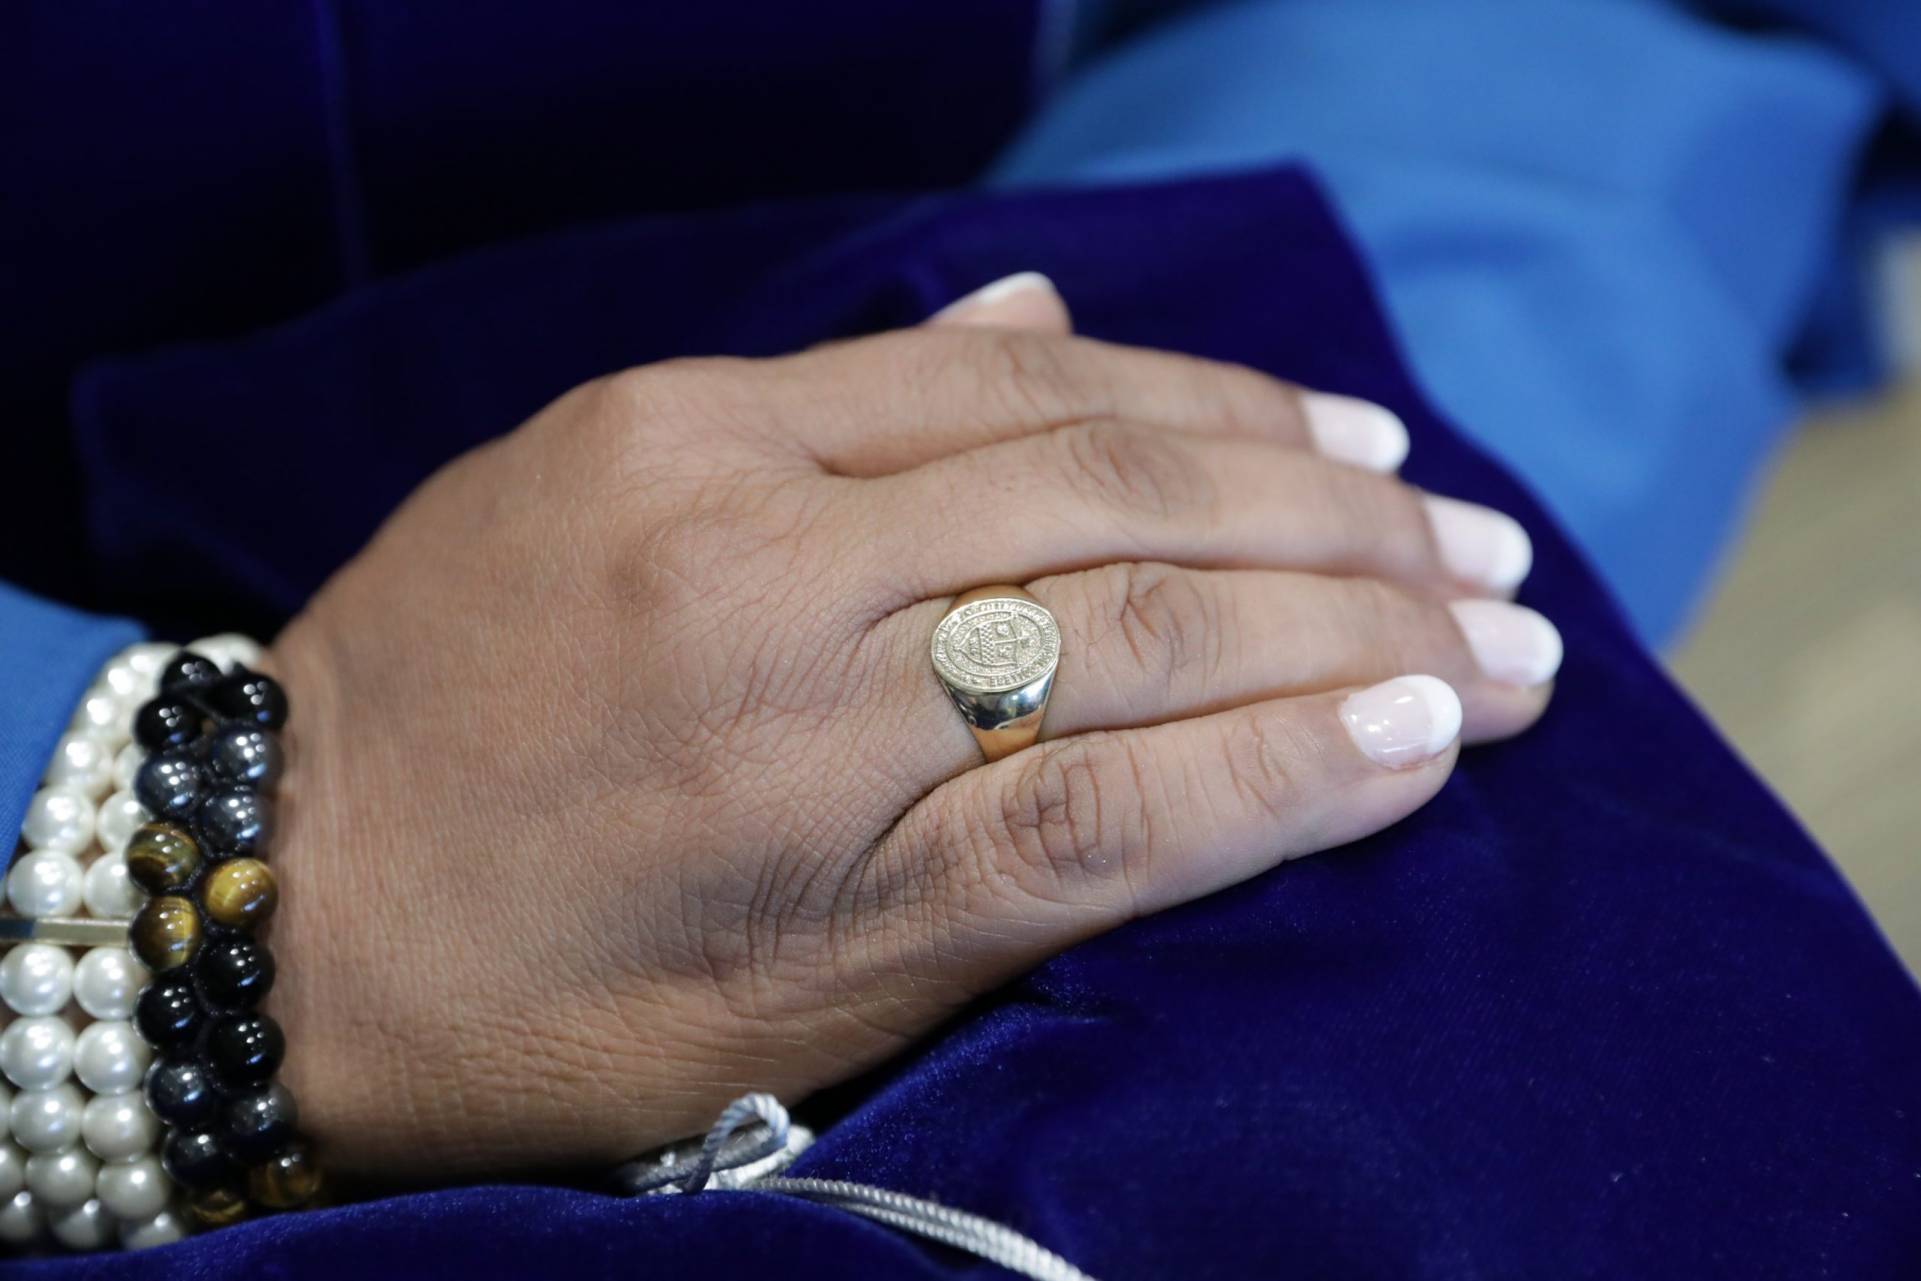 The presidential ring received by Dr. Harvey-Smith for the Installation Ceremony.